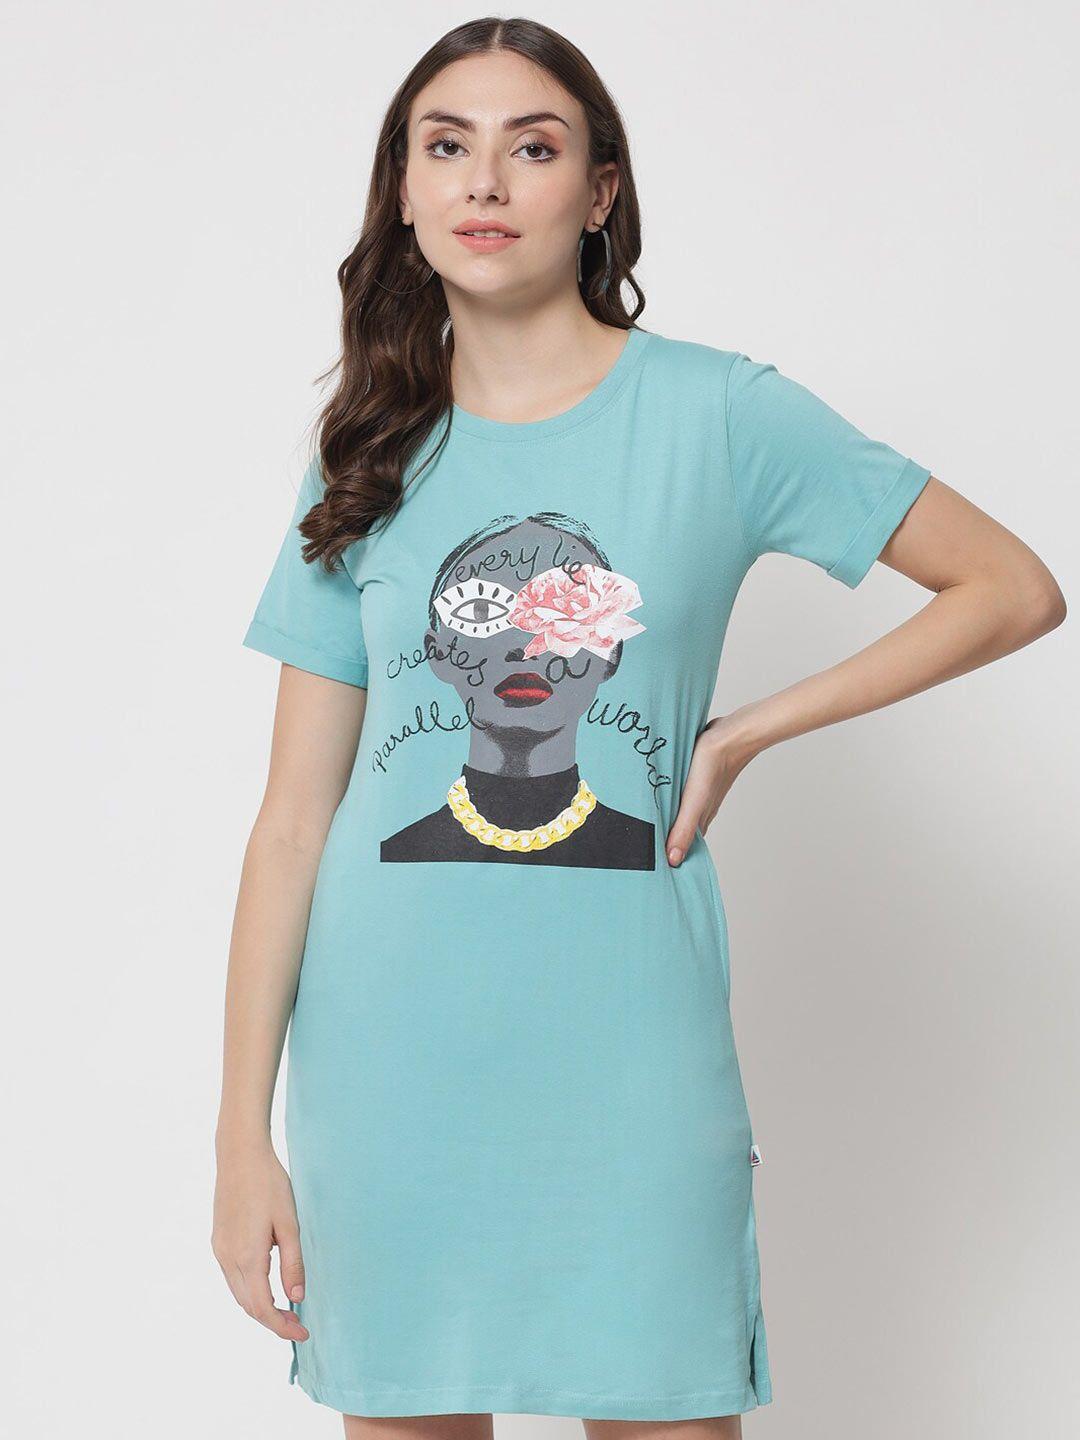 the dry state women turquoise blue cotton t-shirt dress